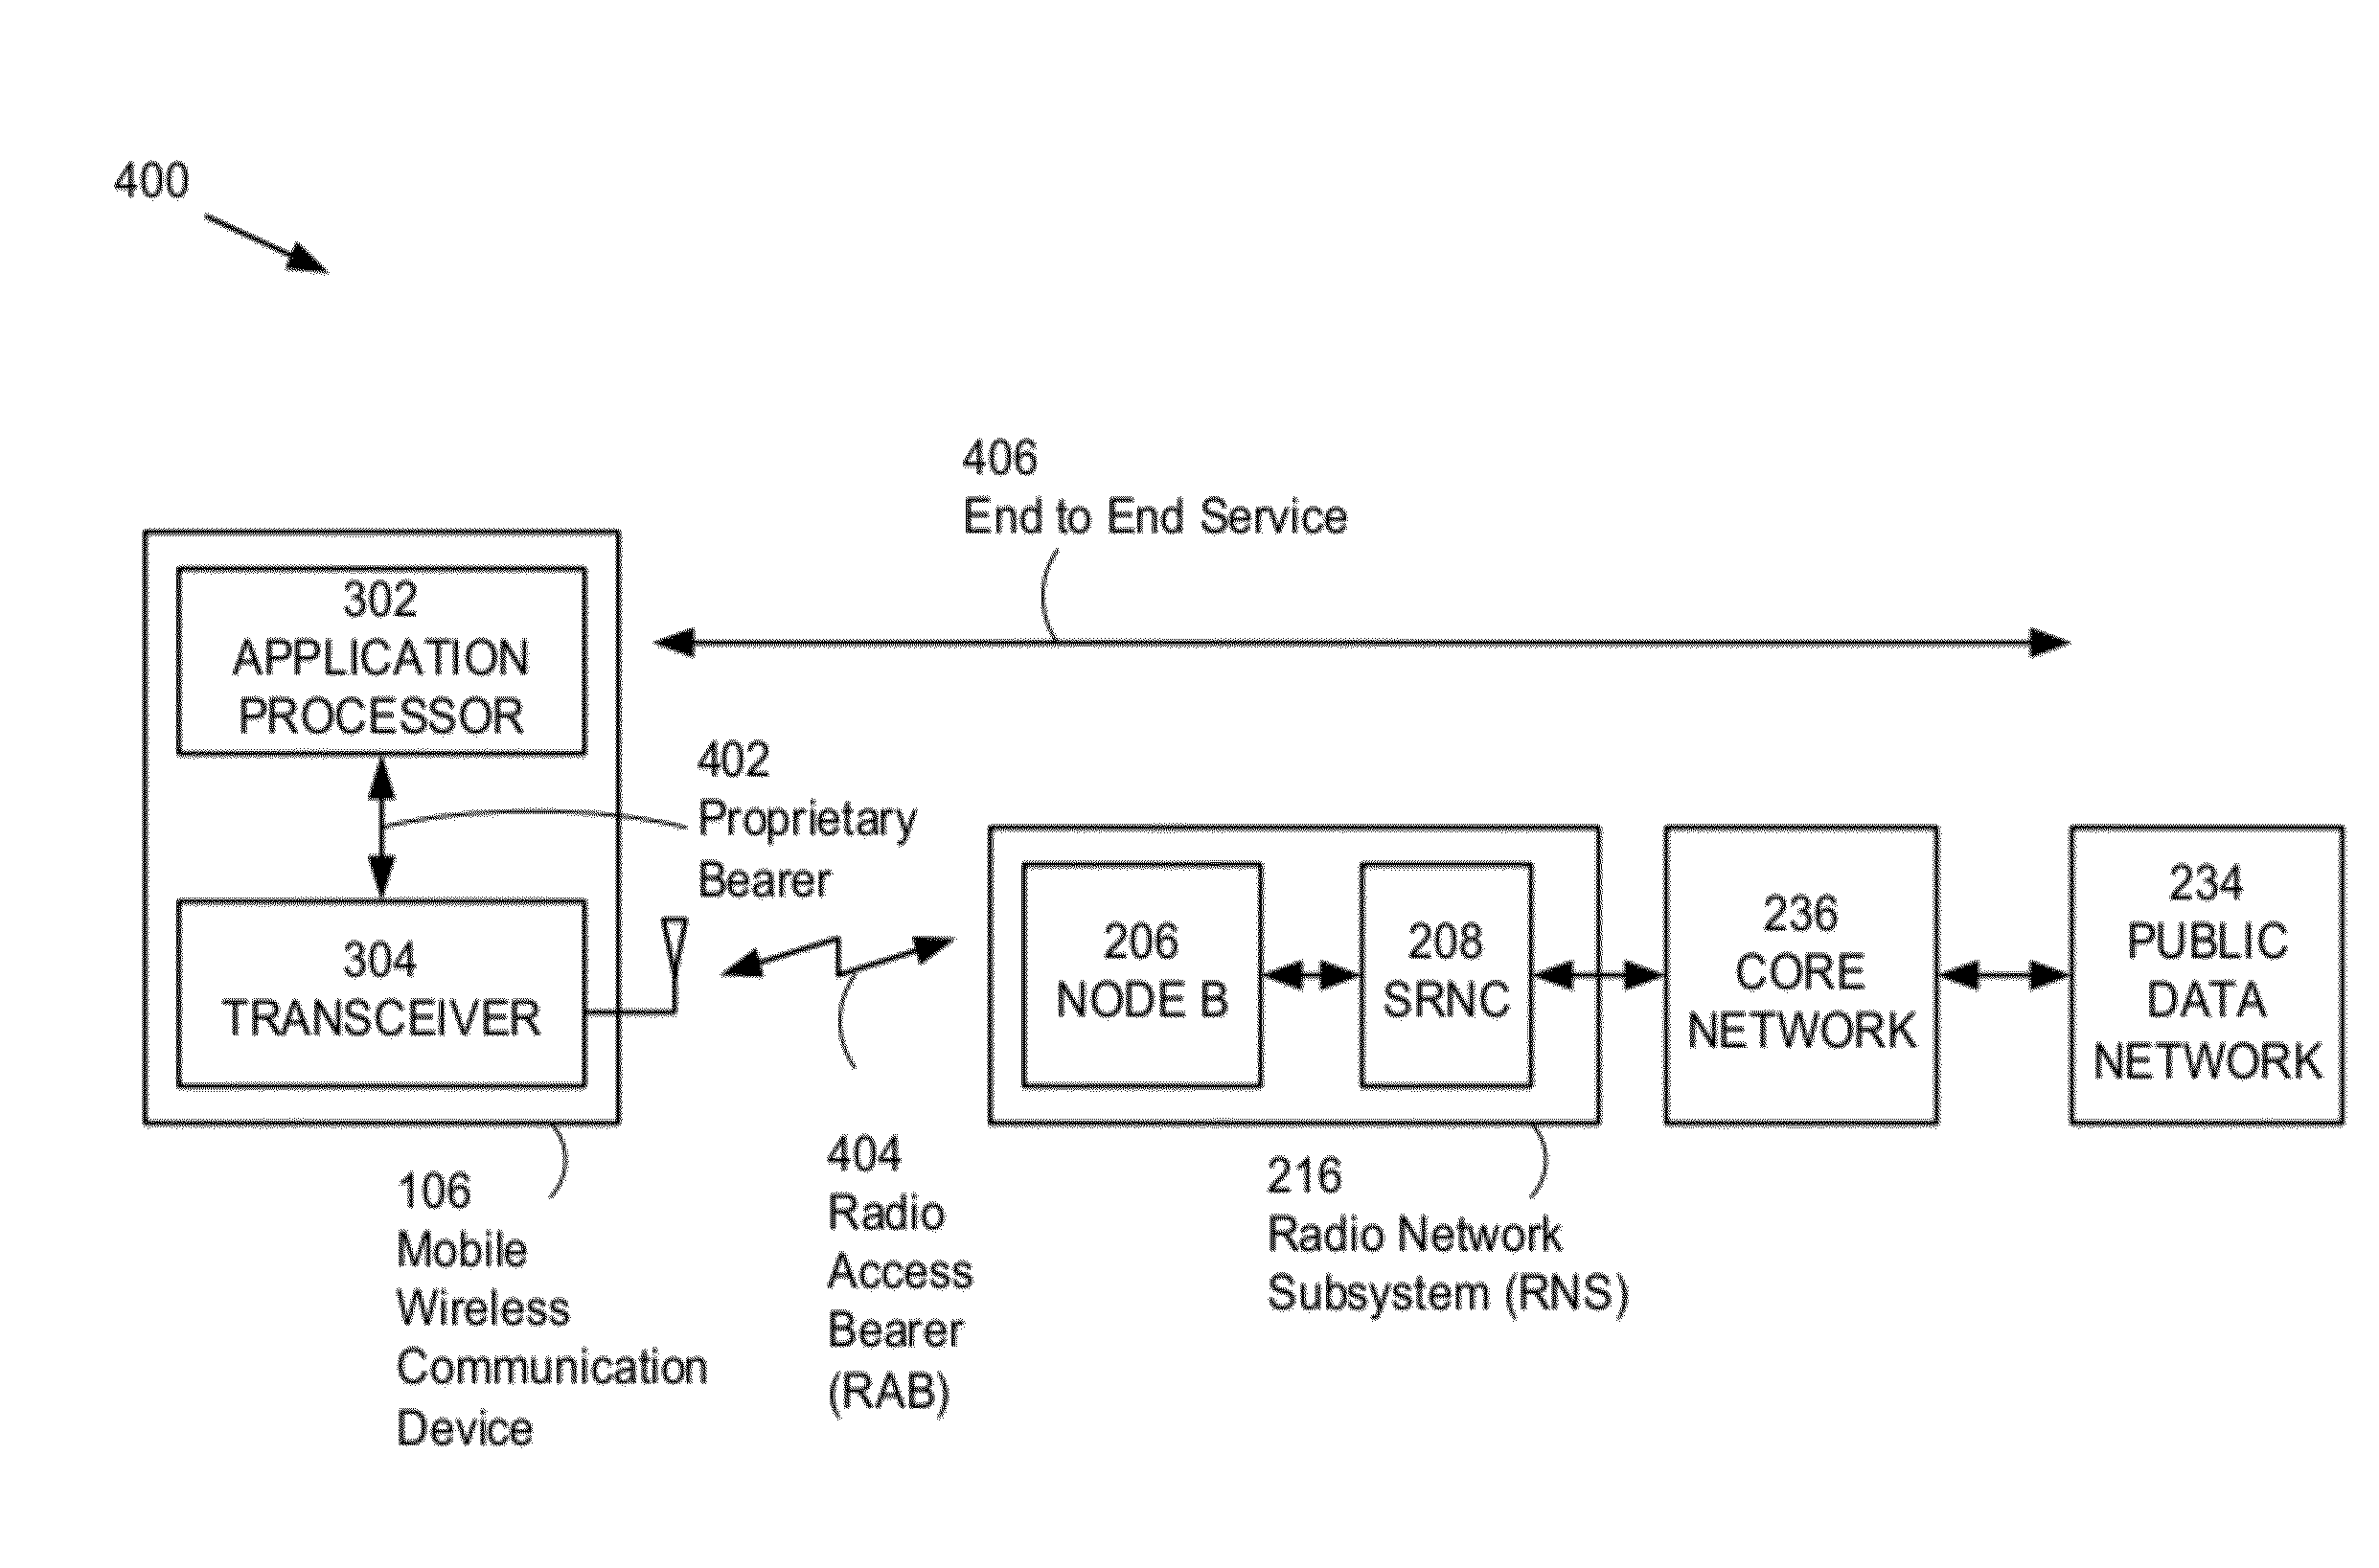 Adapting transmission to improve QoS in a mobile wireless device